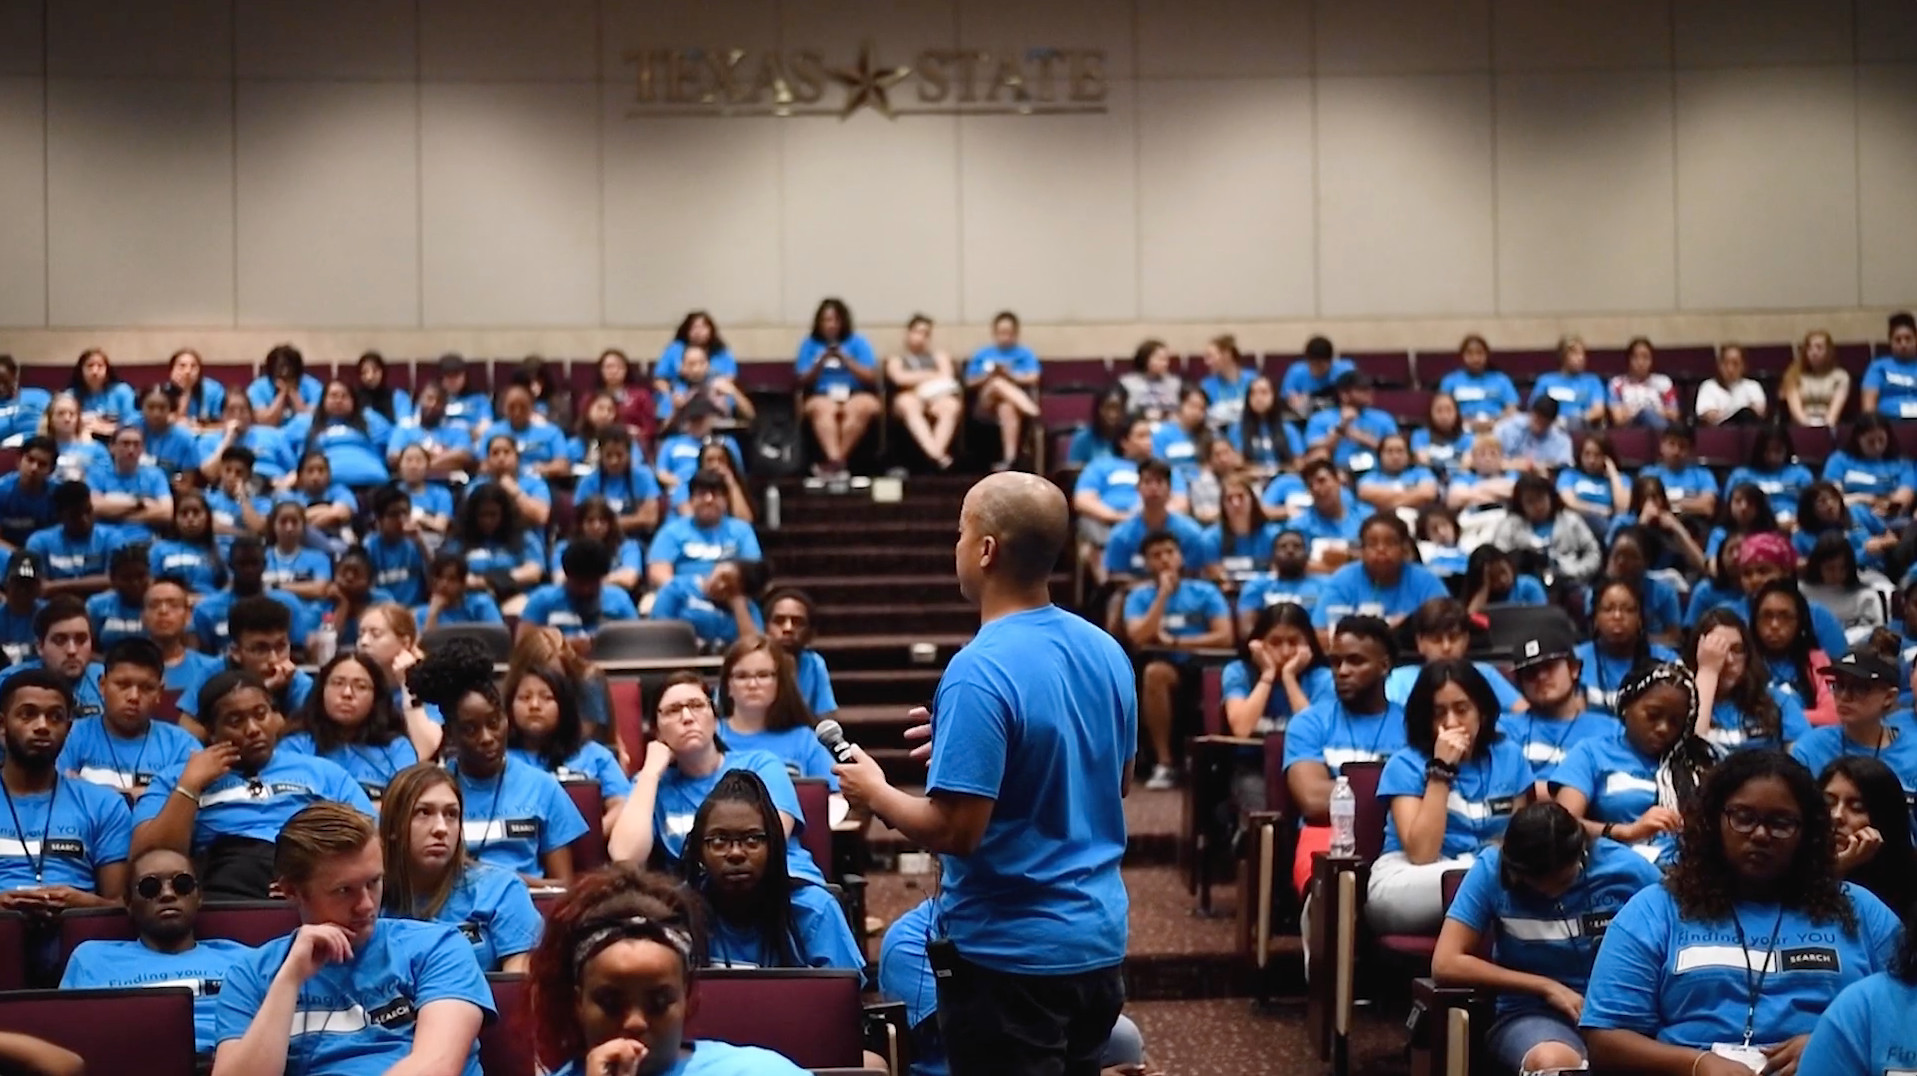 2019 TRIO Student Leadership Conference at Texas state